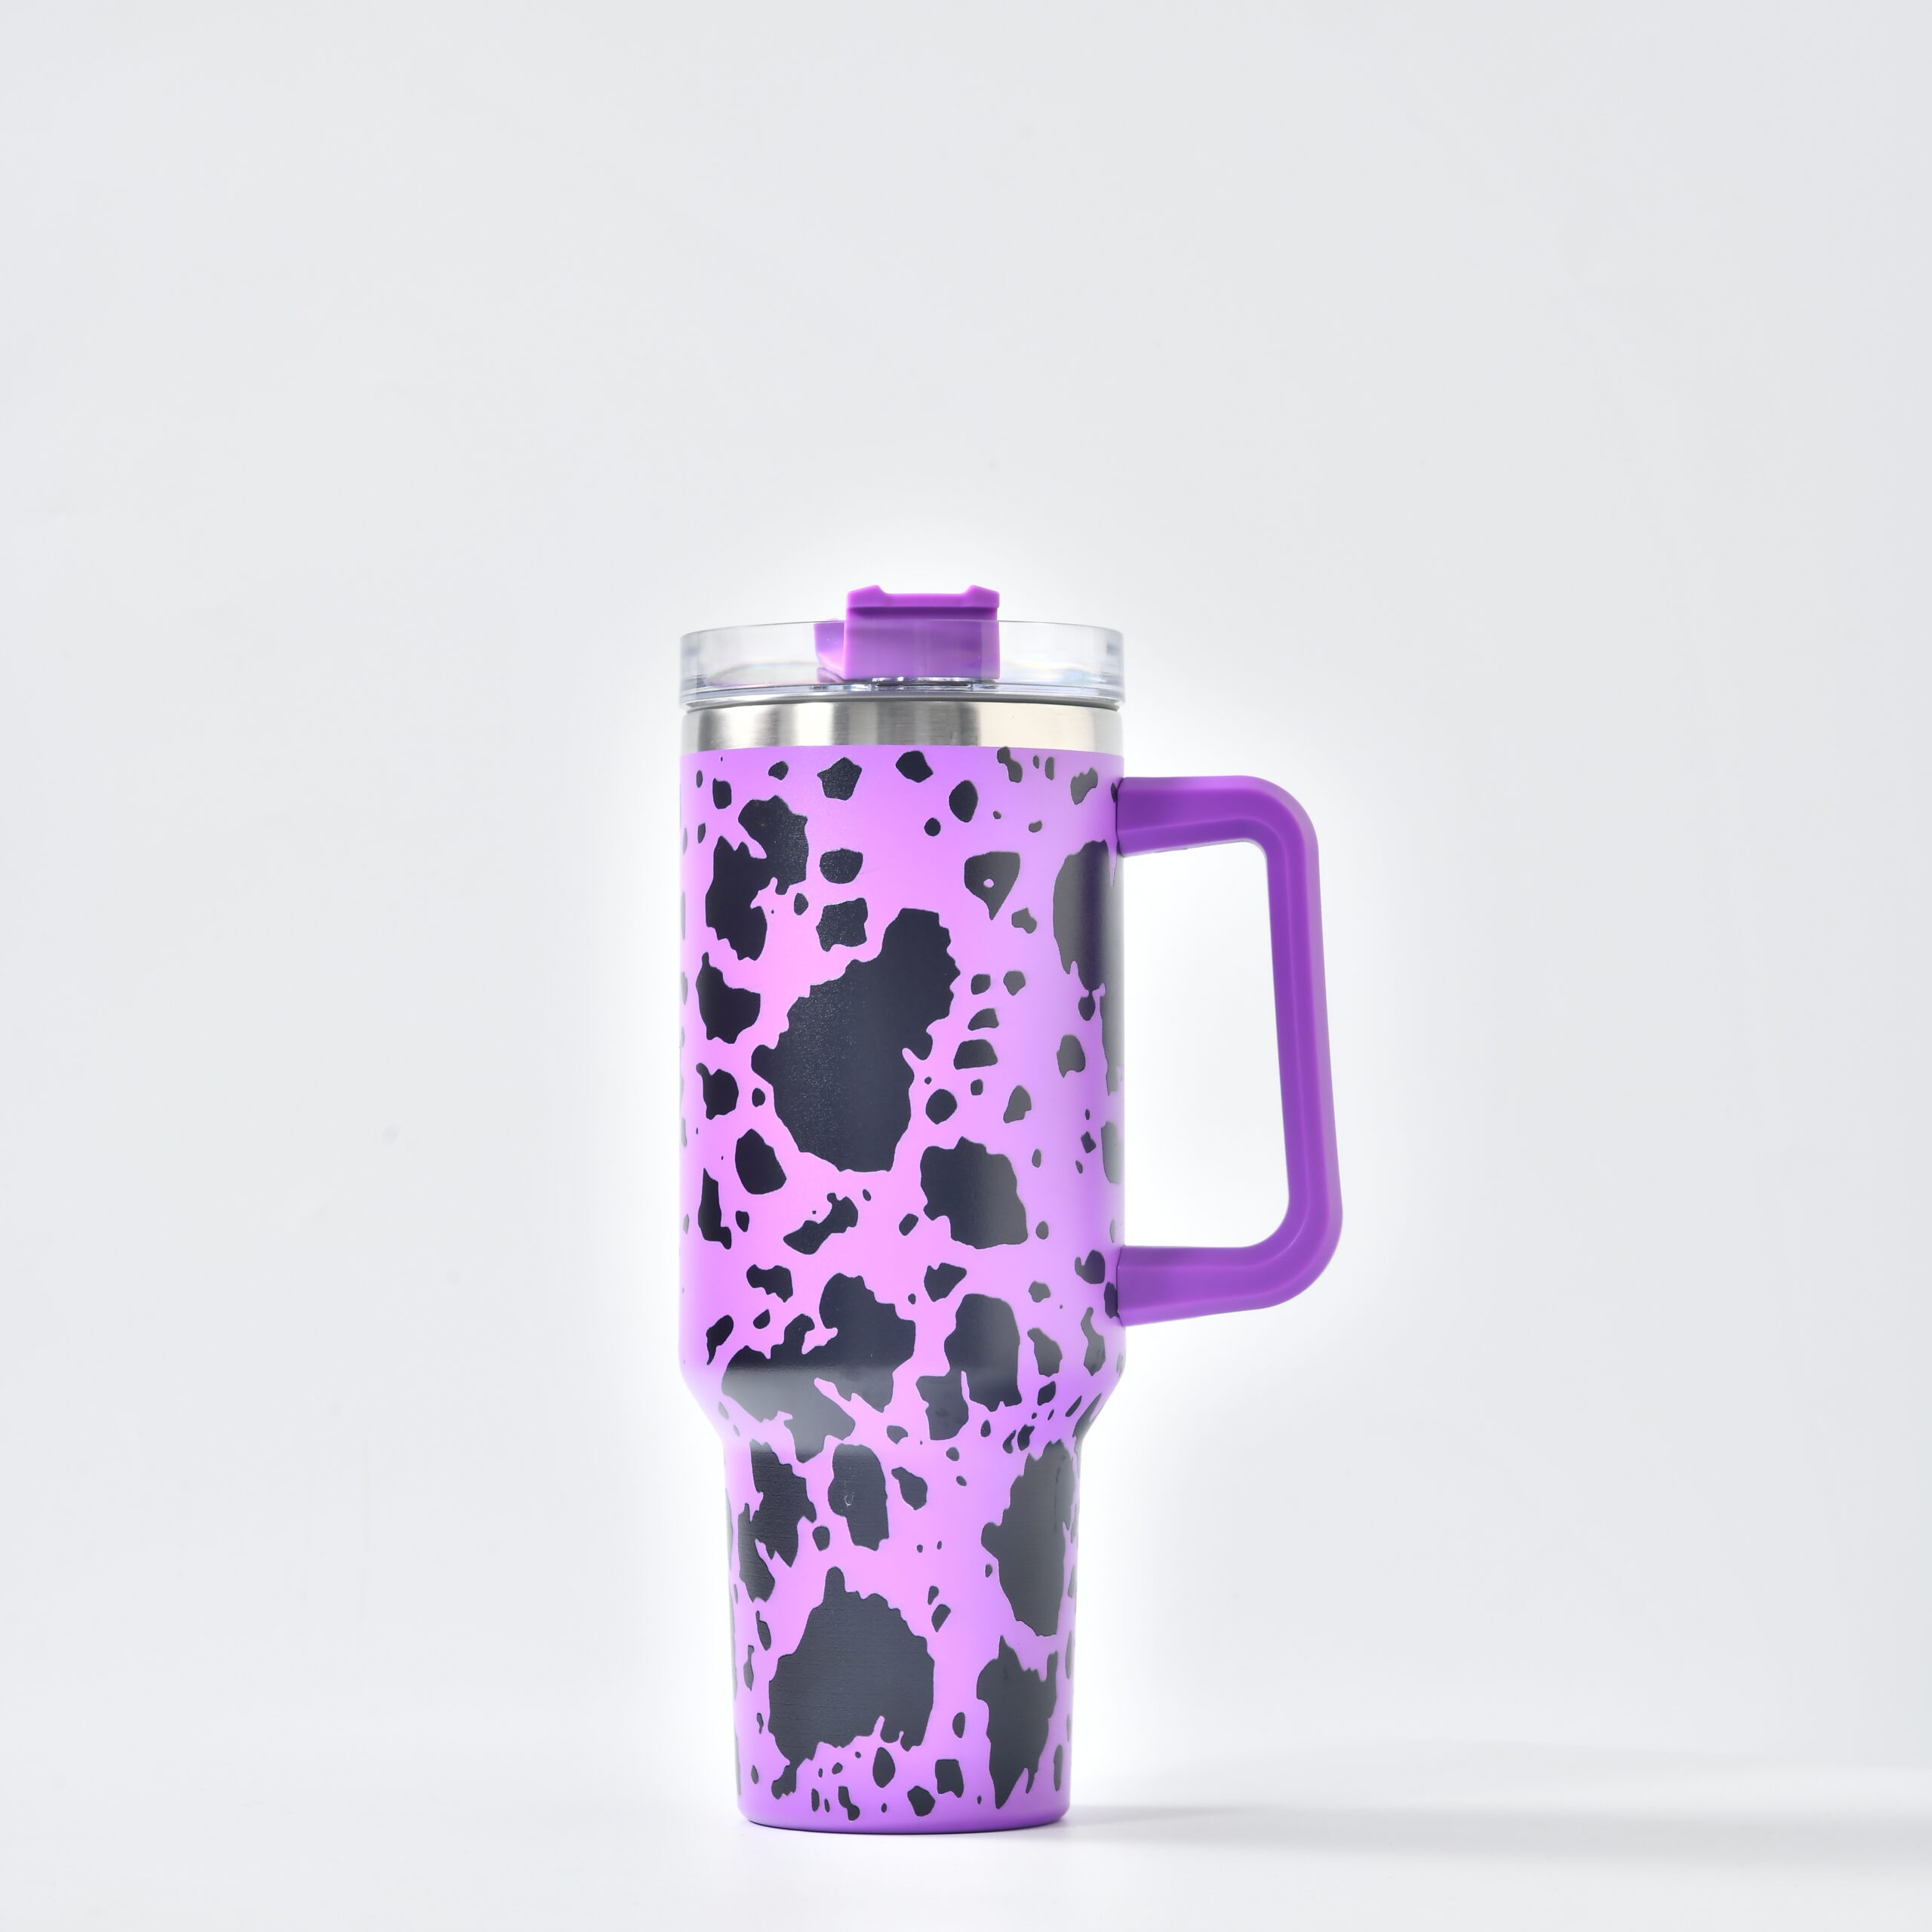 QEAGVJ 40oz Cow print Insulated Tumbler With Lid and